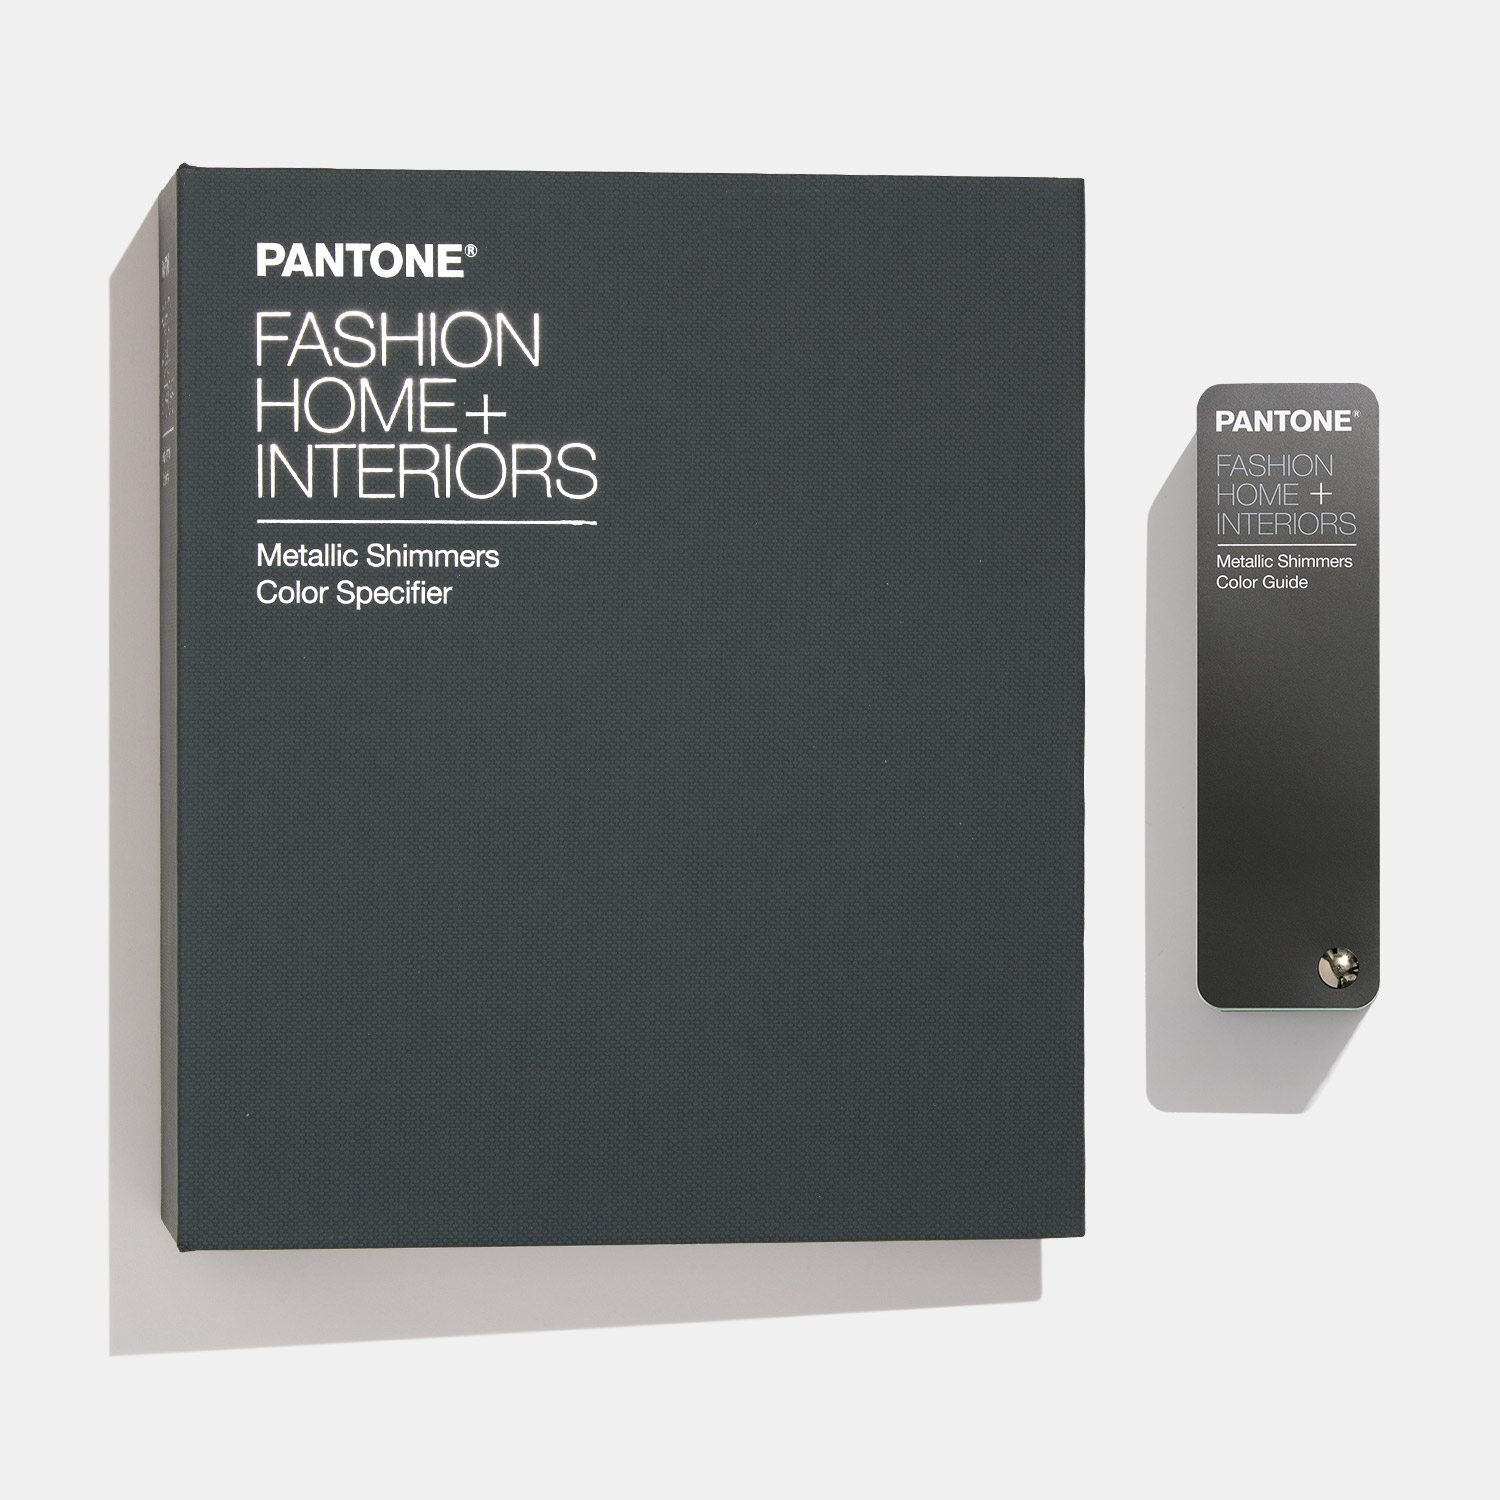 Pantone Fashion, Home + Interiors Metallic Shimmers Color Specifier and Guide Set